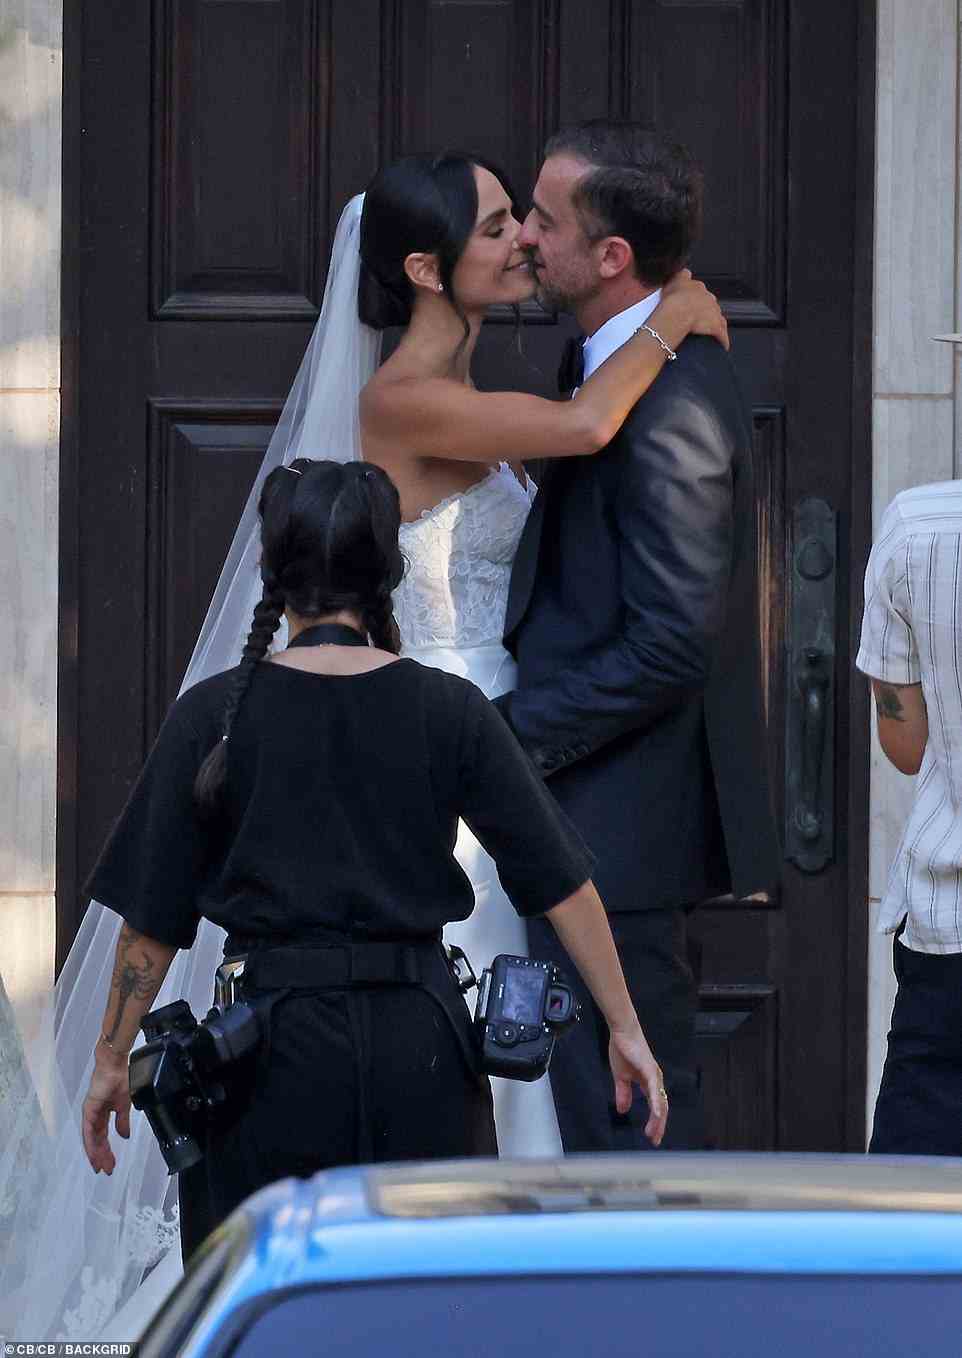 Locking lips: After exchanging their vows, the lovebirds shared a passionate kiss